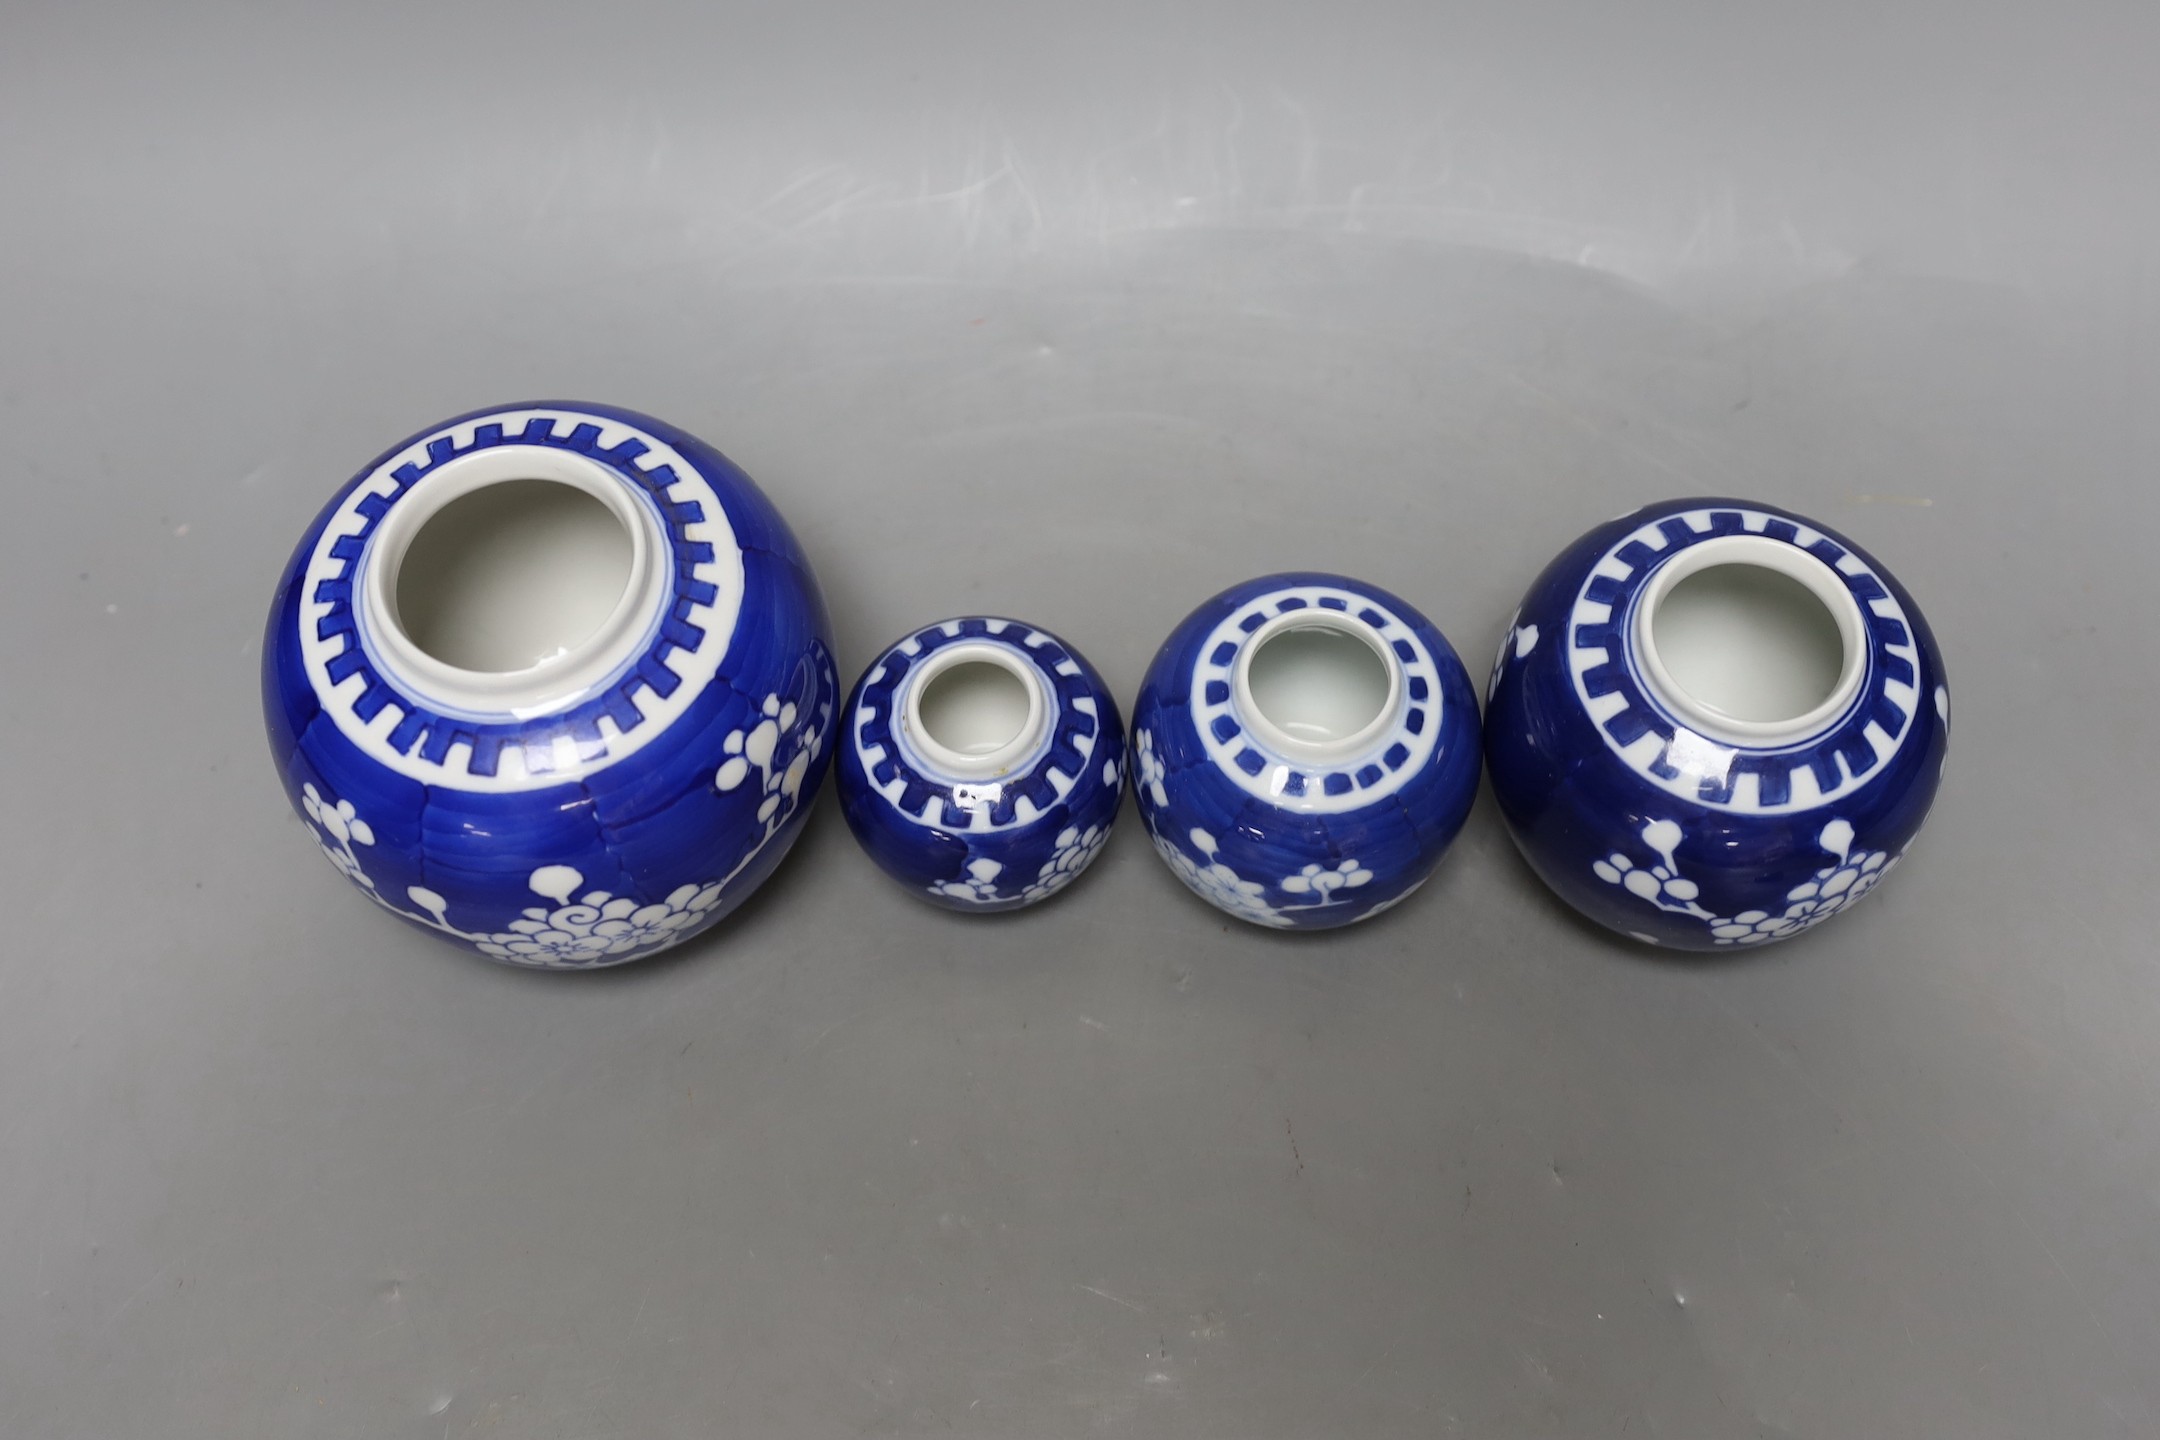 A Chinese bronze hand warmer and four Chinese blue and white Prunus jars and covers. Tallest 12cm